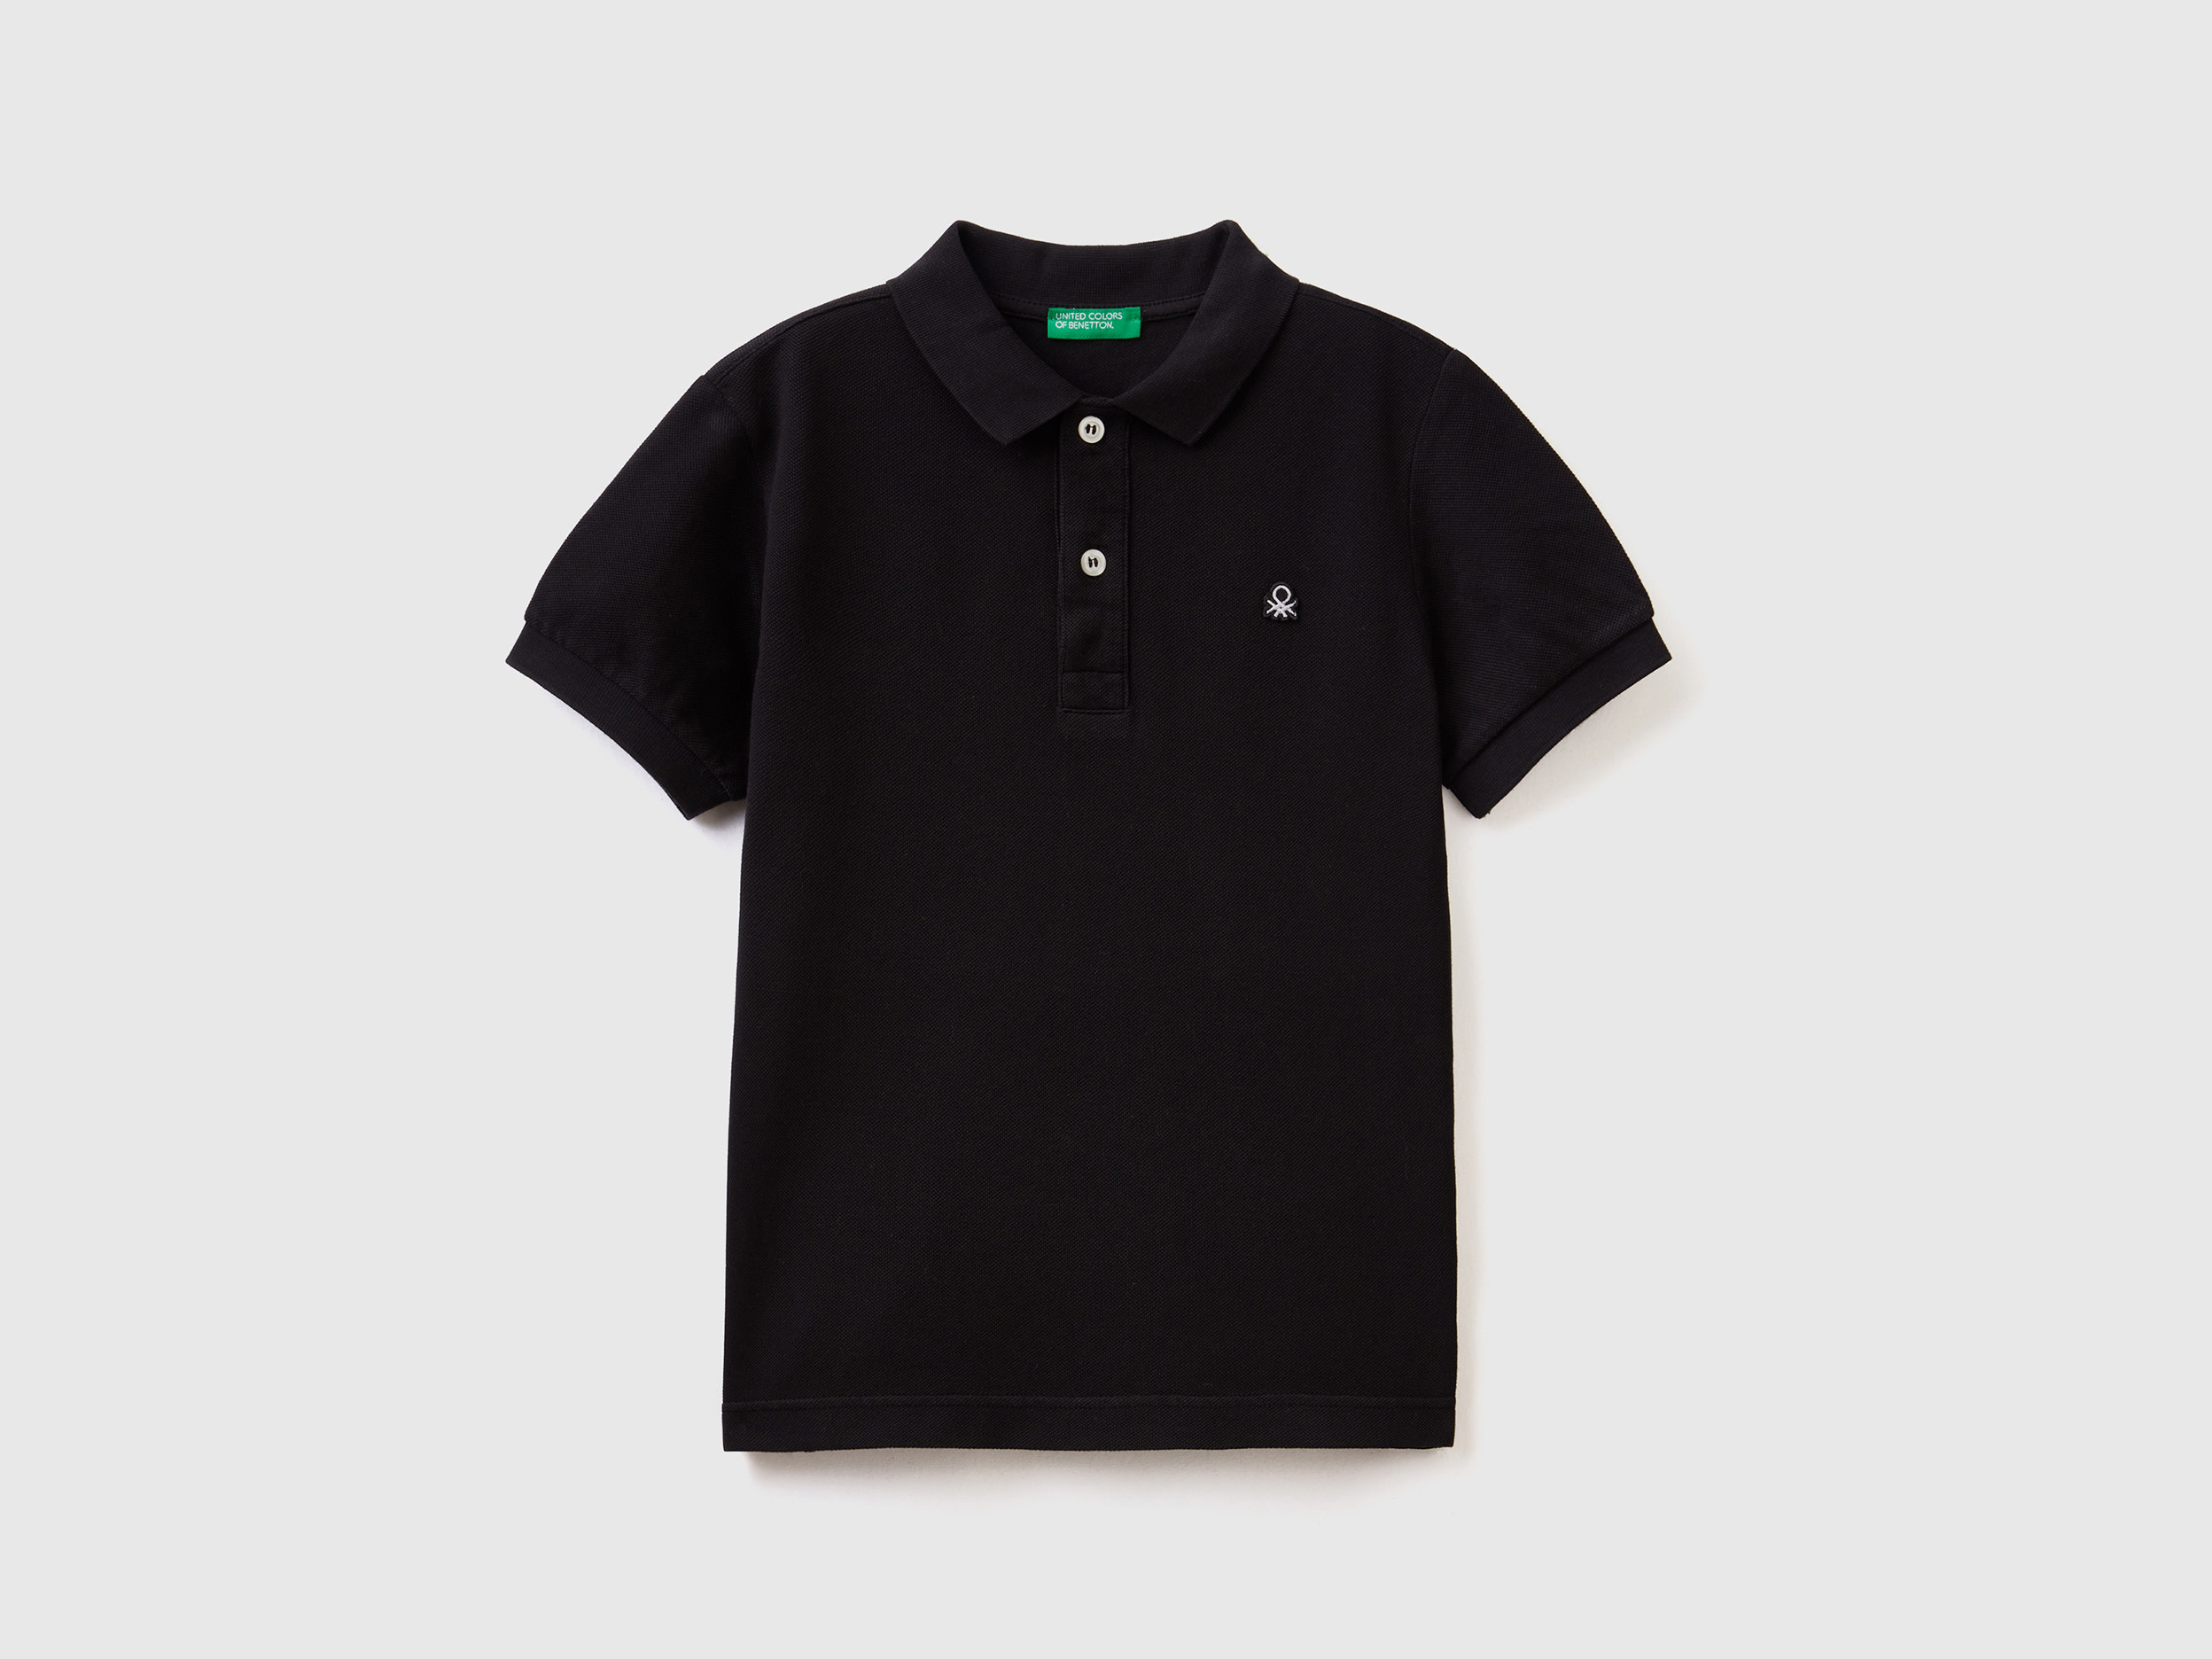 Image of Benetton, Slim Fit Polo In 100% Organic Cotton, size S, Black, Kids